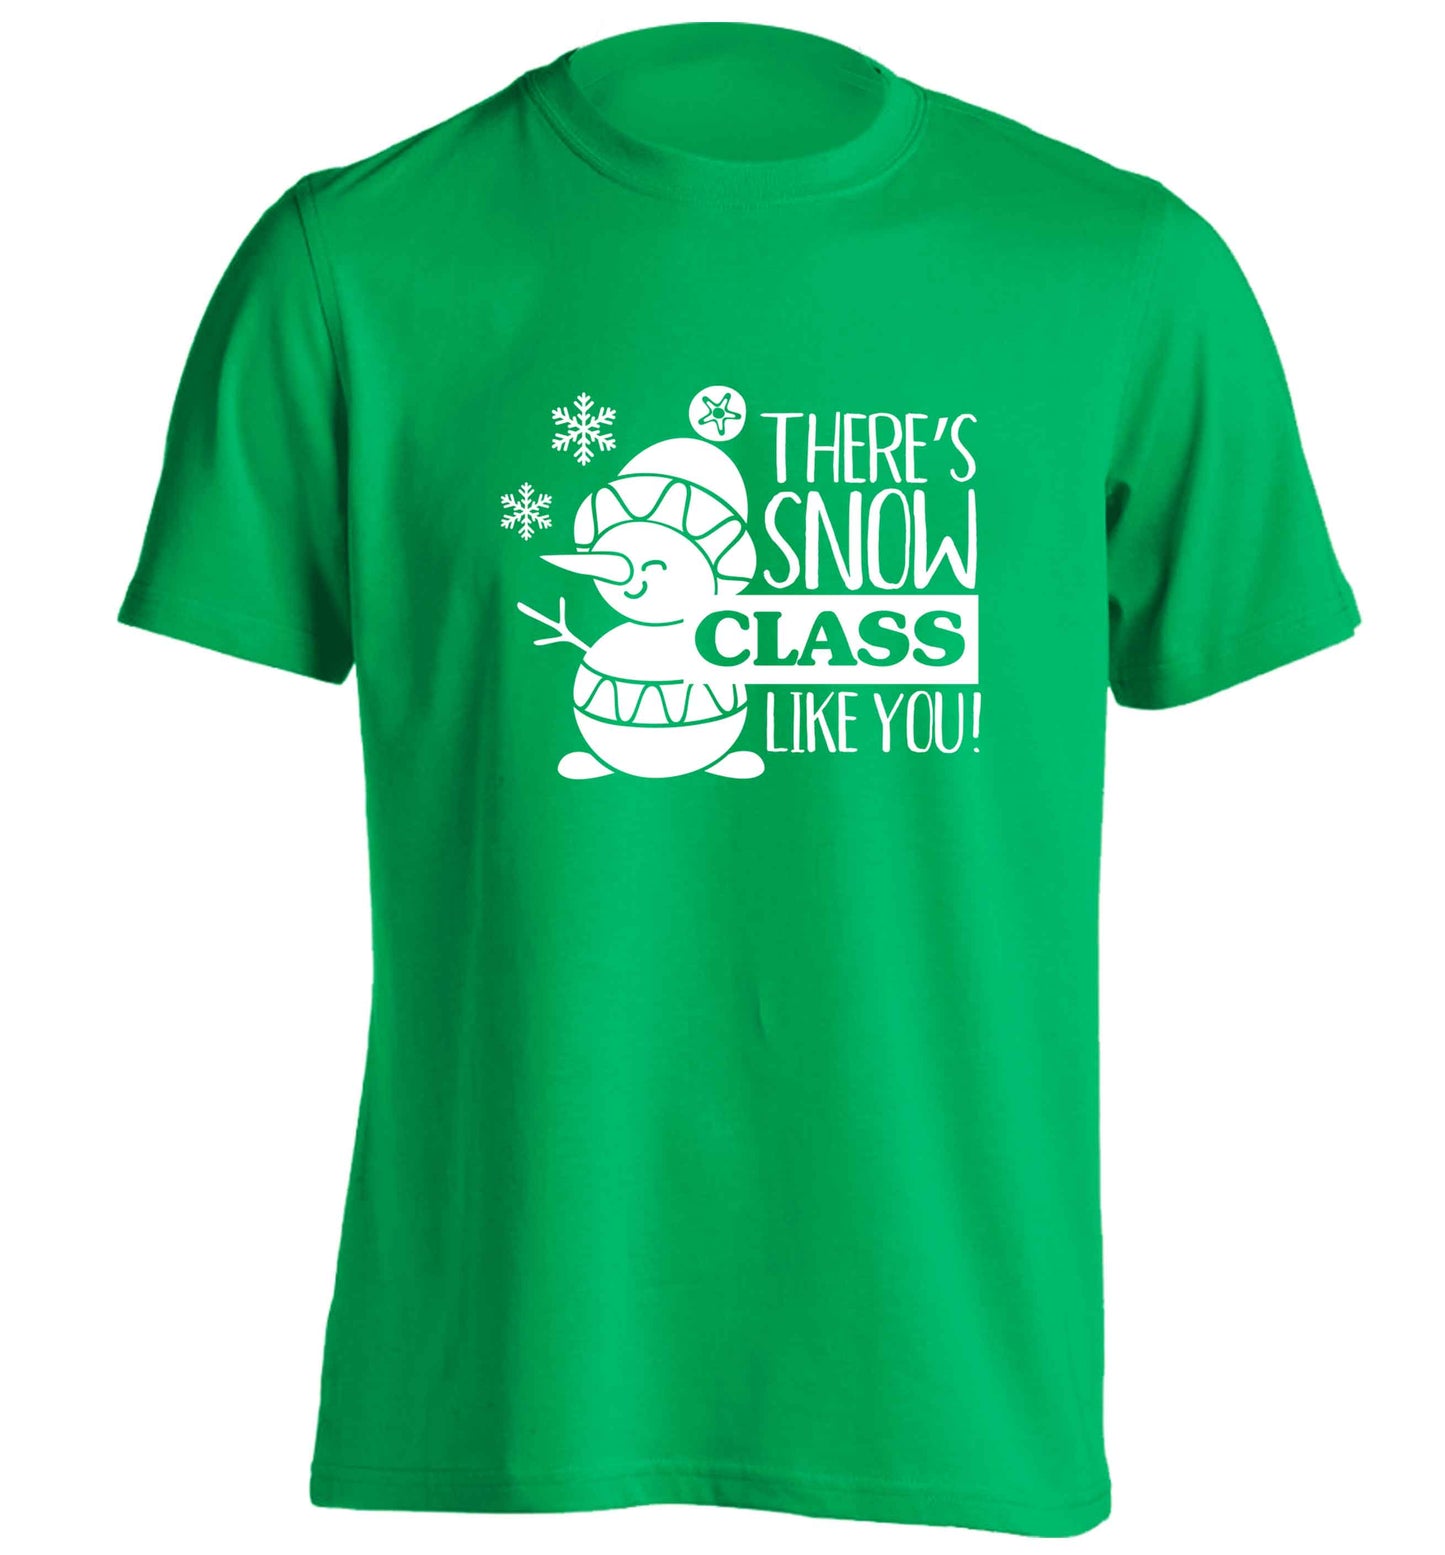 There's snow class like you adults unisex green Tshirt 2XL